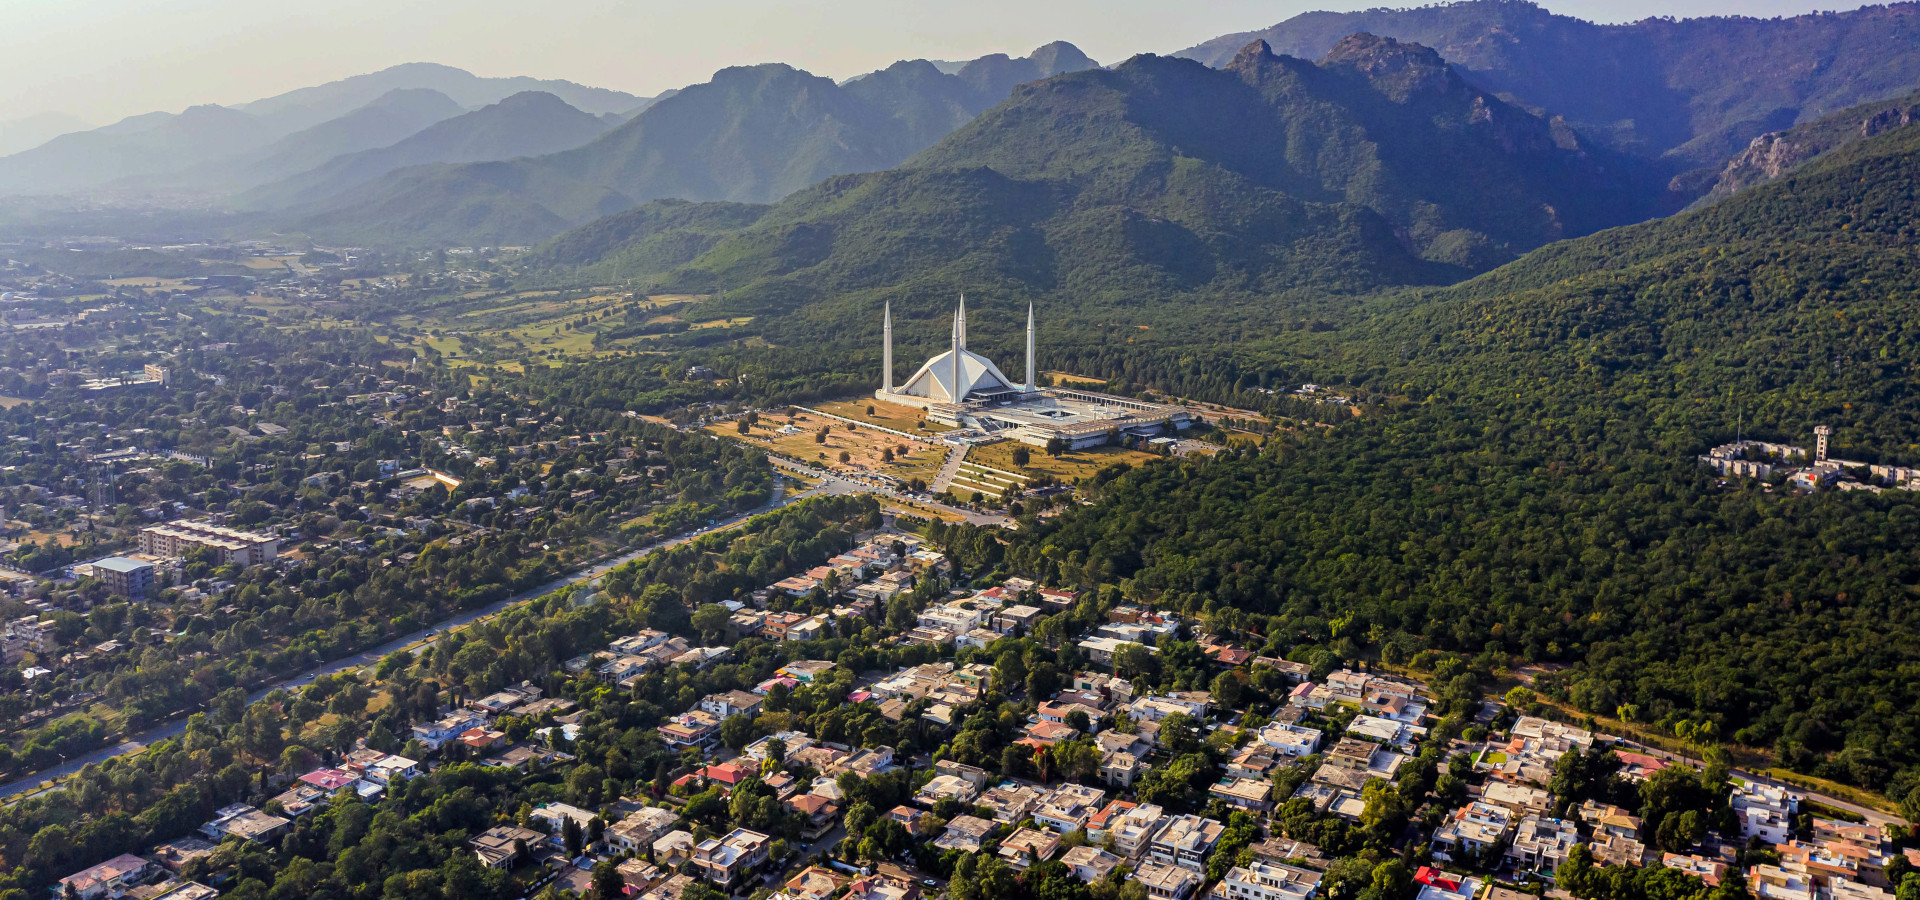 View of the Shah Faisal Mosque in Islamabad at the foot of the Margalla Hills.